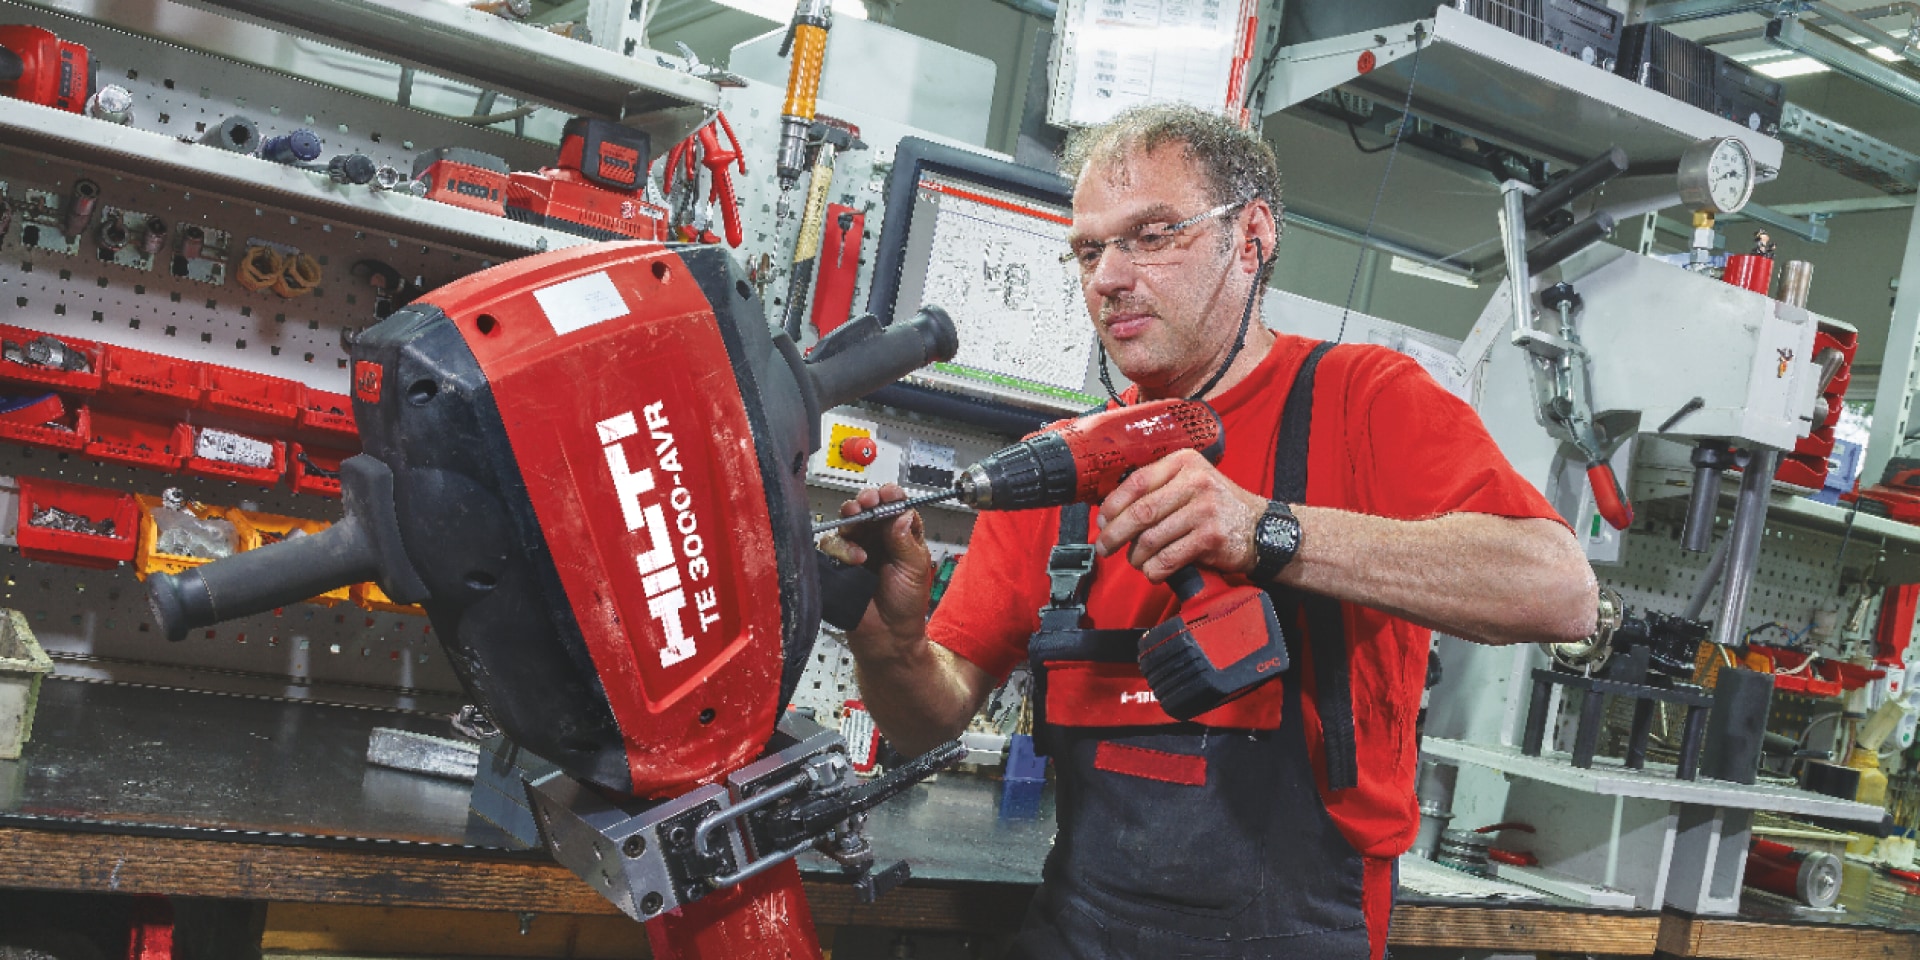 A Hilti tool being repaired